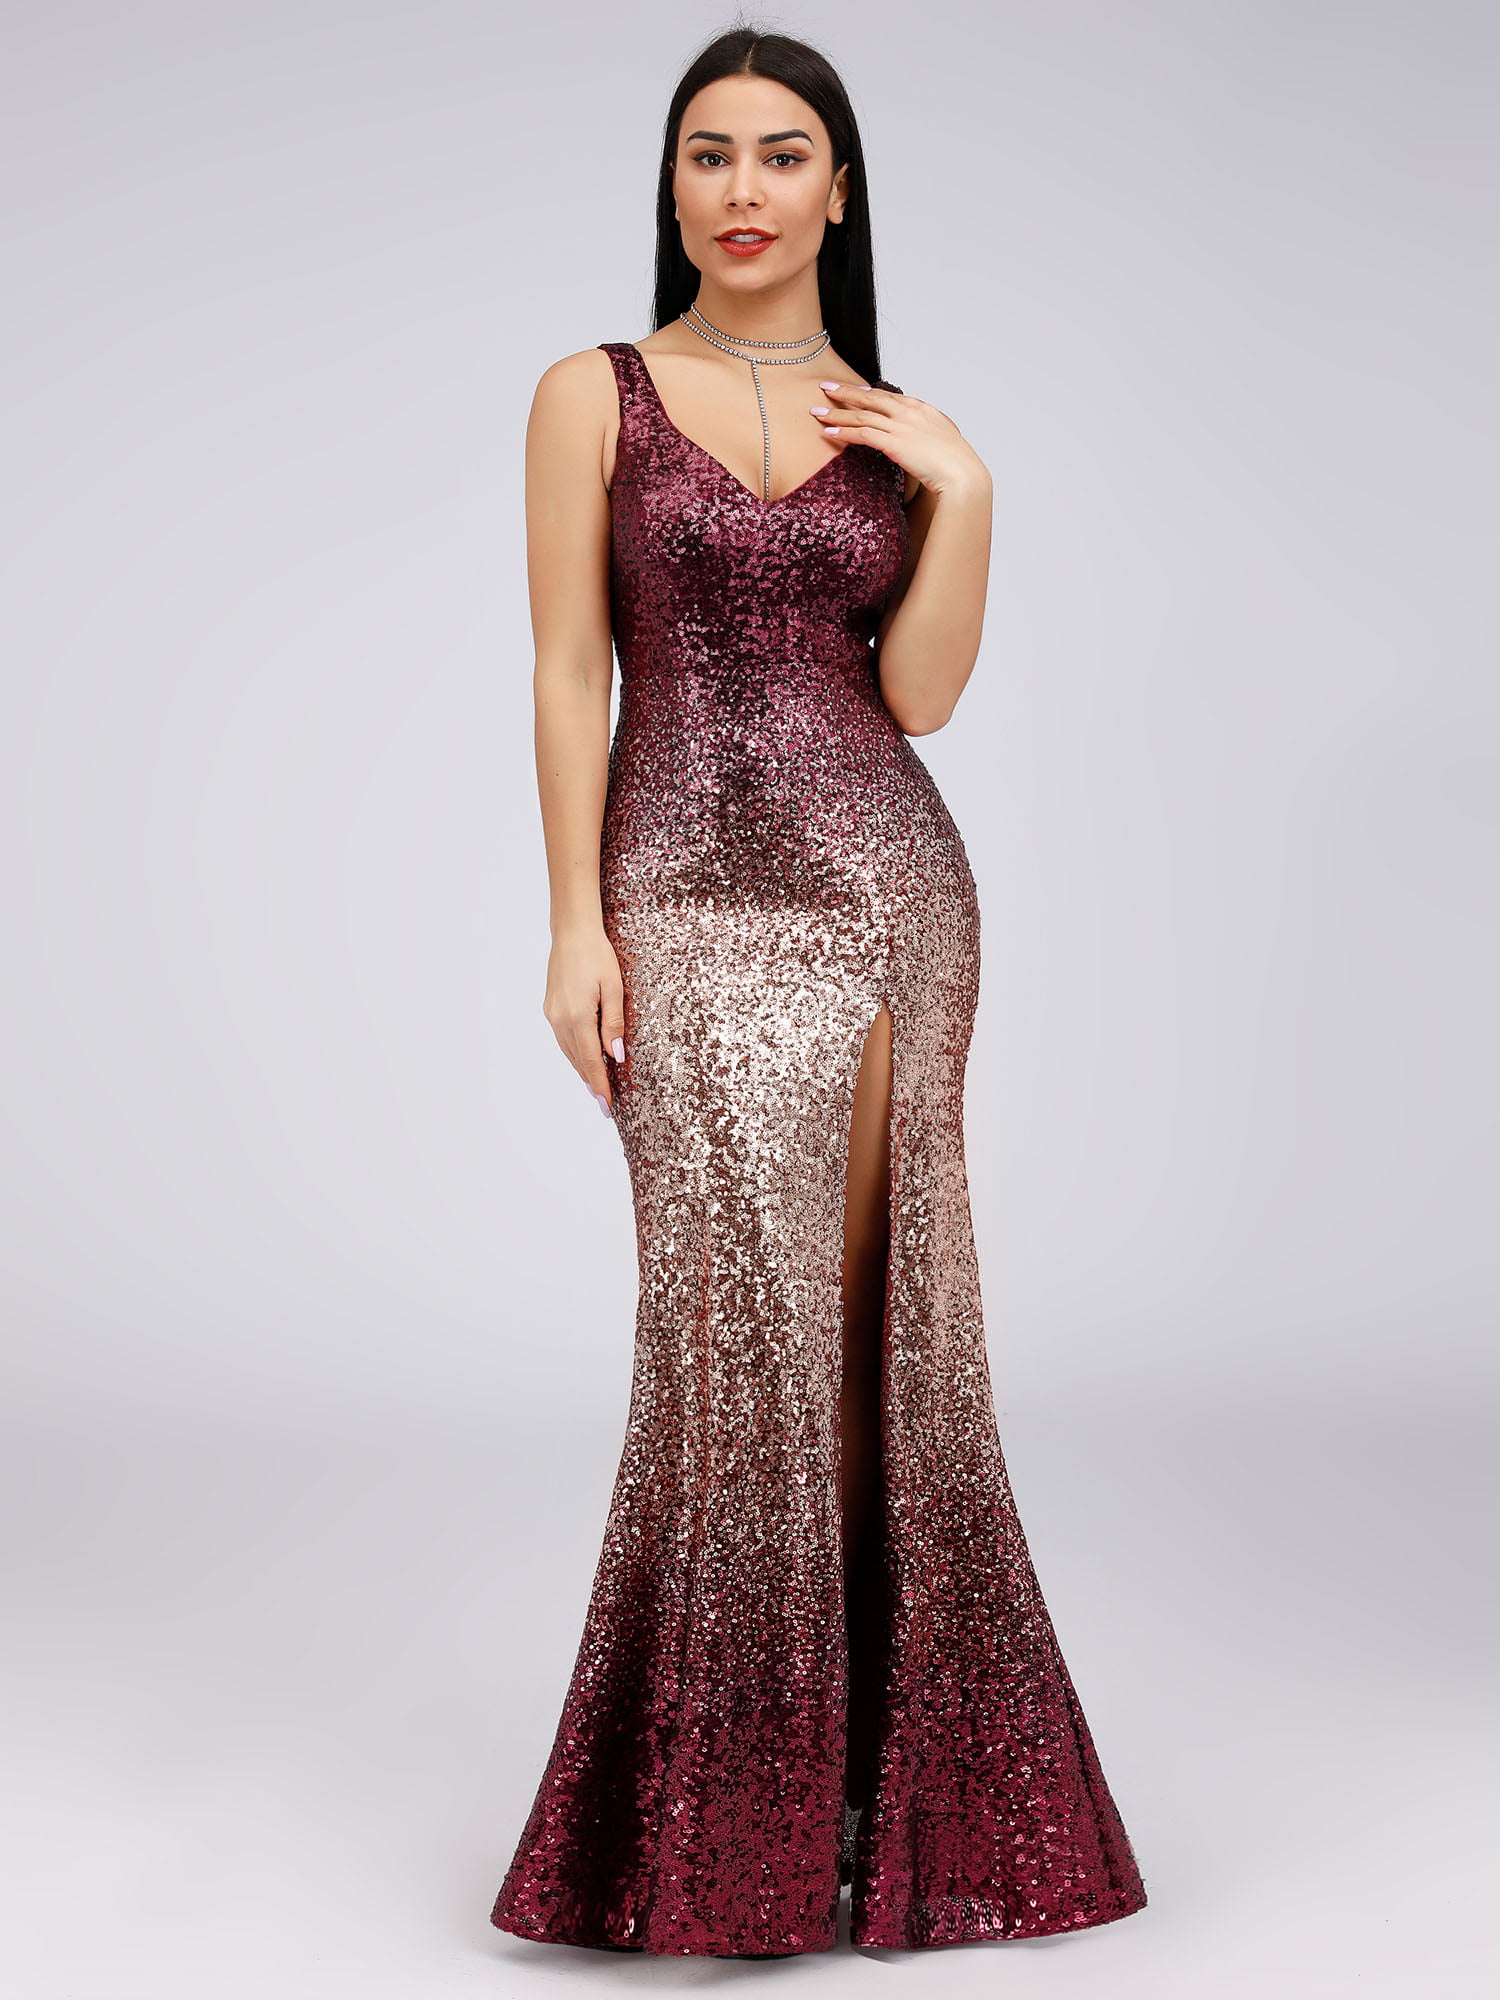 Sexy Sequins Cocktail Party Dresses ...